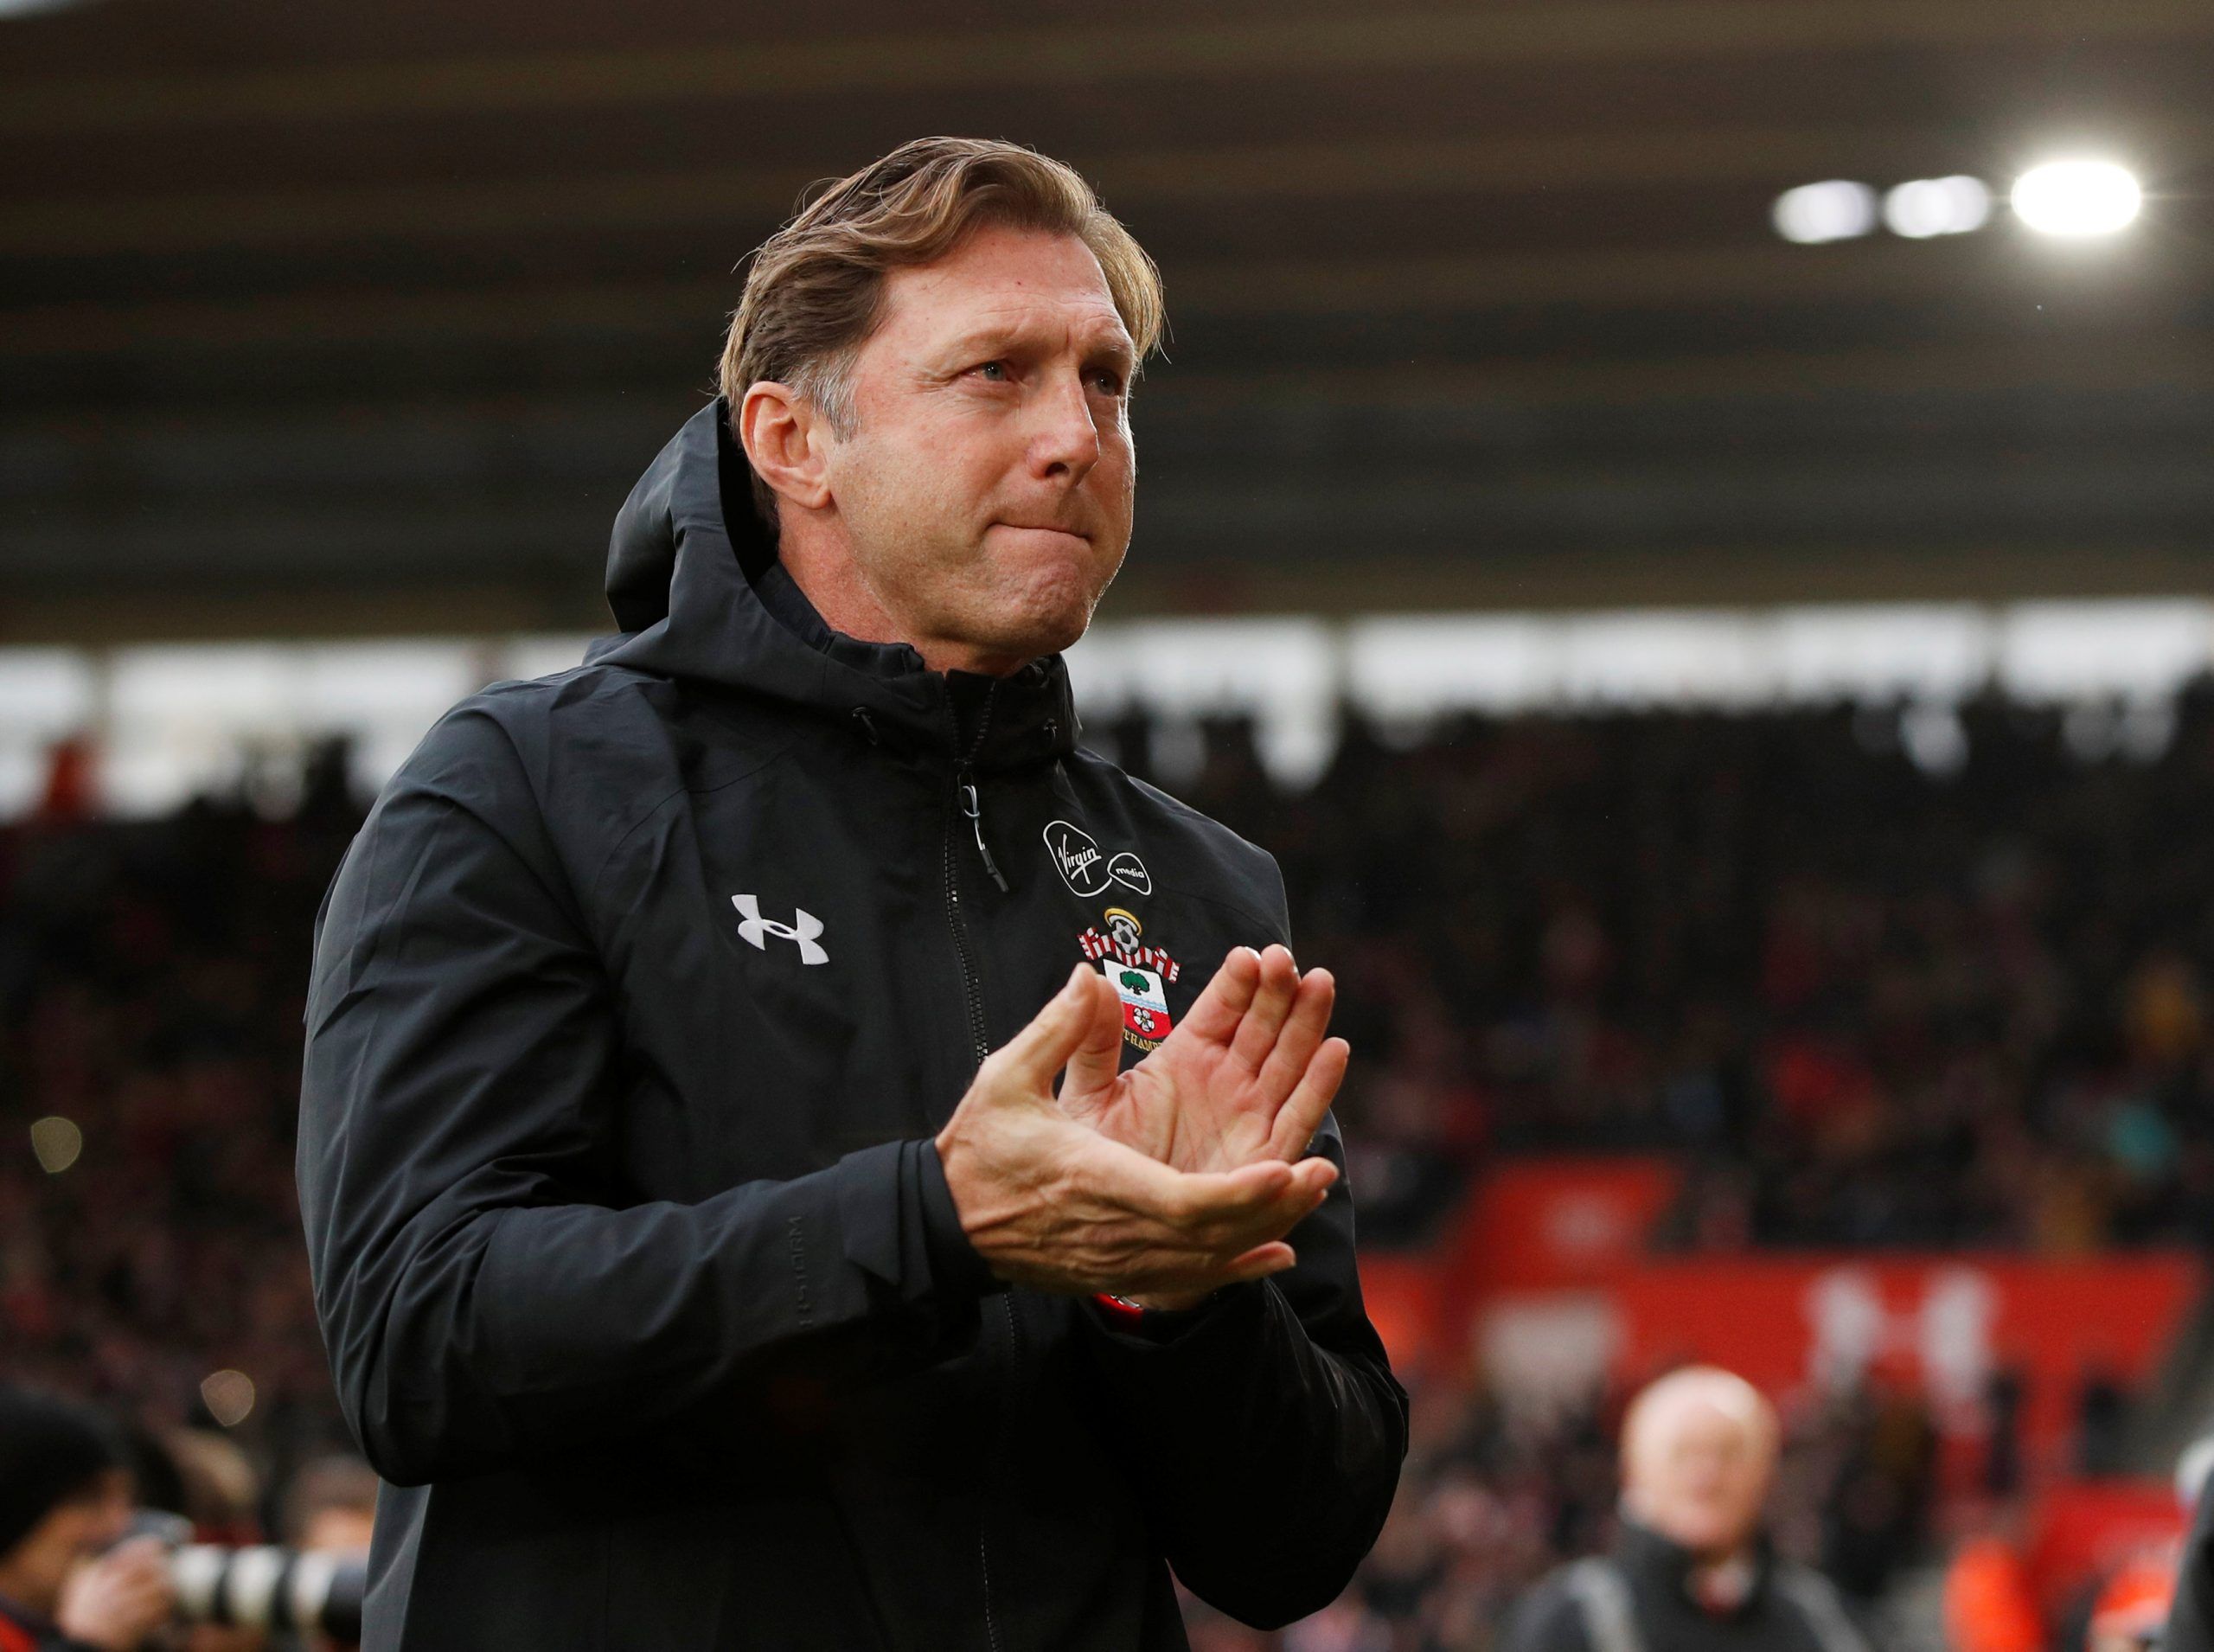 Soccer Football - Premier League - Southampton v Arsenal - St Mary's Stadium, Southampton, Britain - December 16, 2018  Southampton manager Ralph Hasenhuttl before the match   Action Images via Reuters/John Sibley  EDITORIAL USE ONLY. No use with unauthorized audio, video, data, fixture lists, club/league logos or 